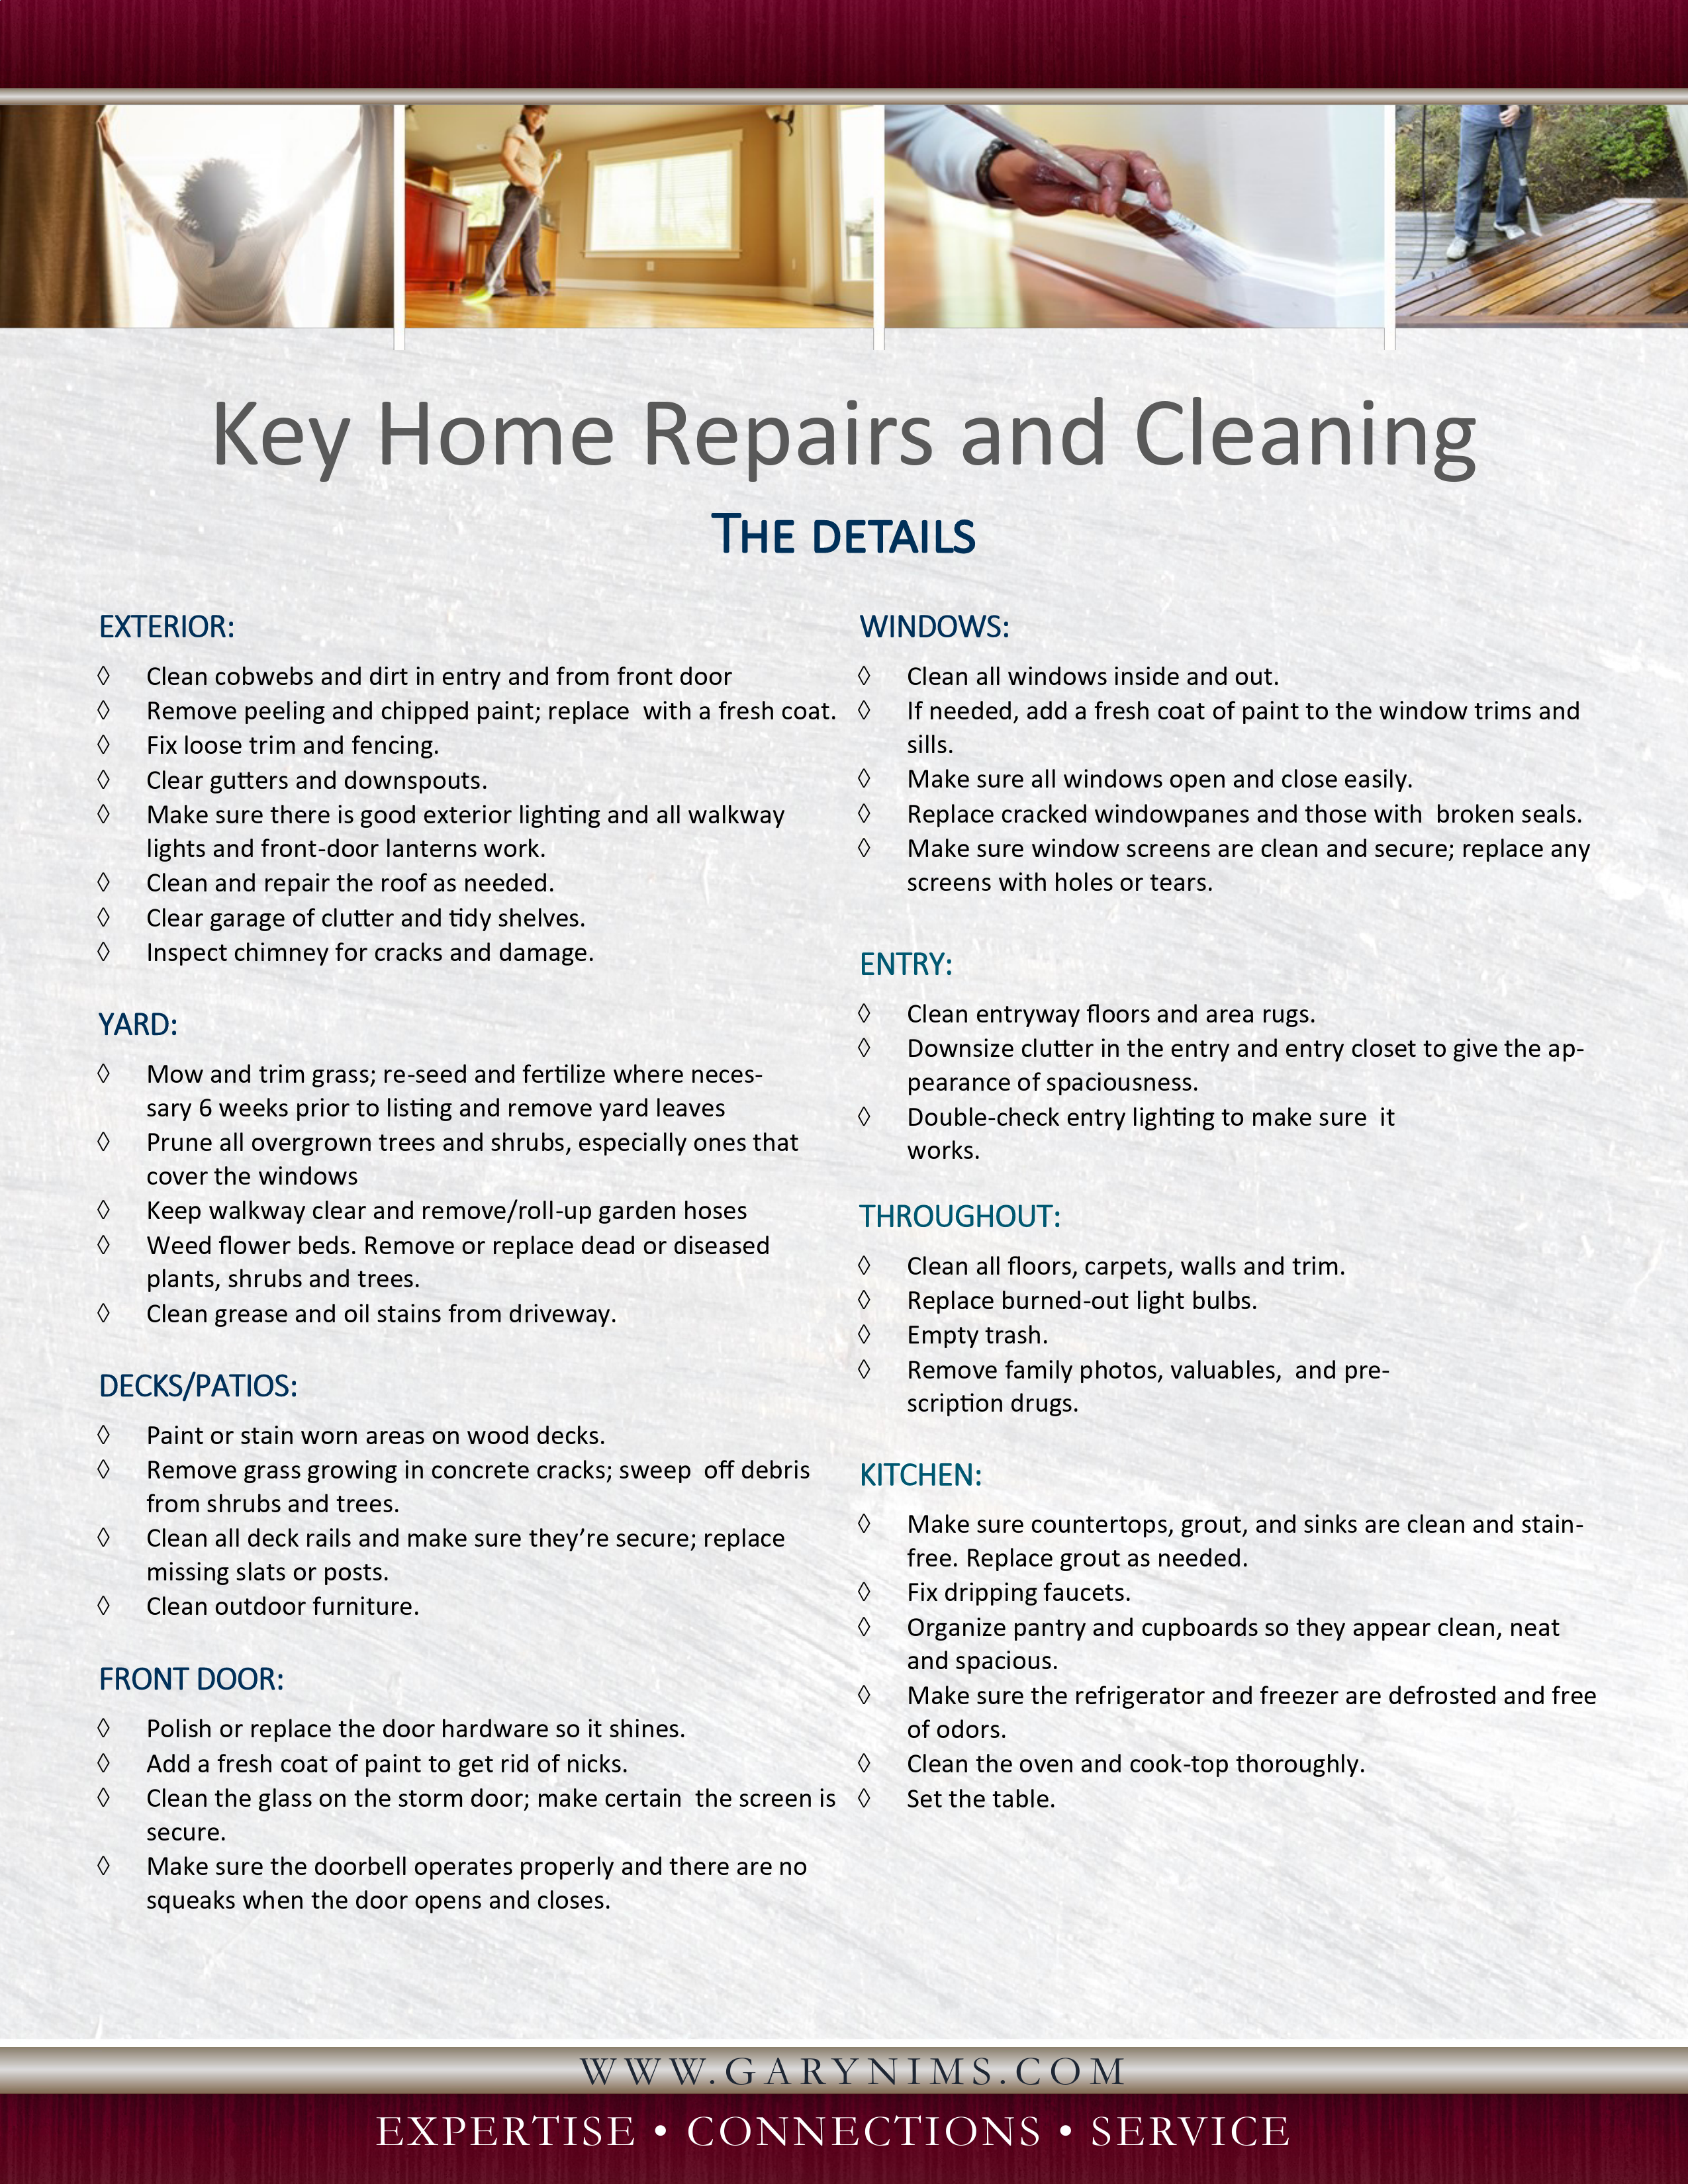 Key Home Repairs and Clng 3